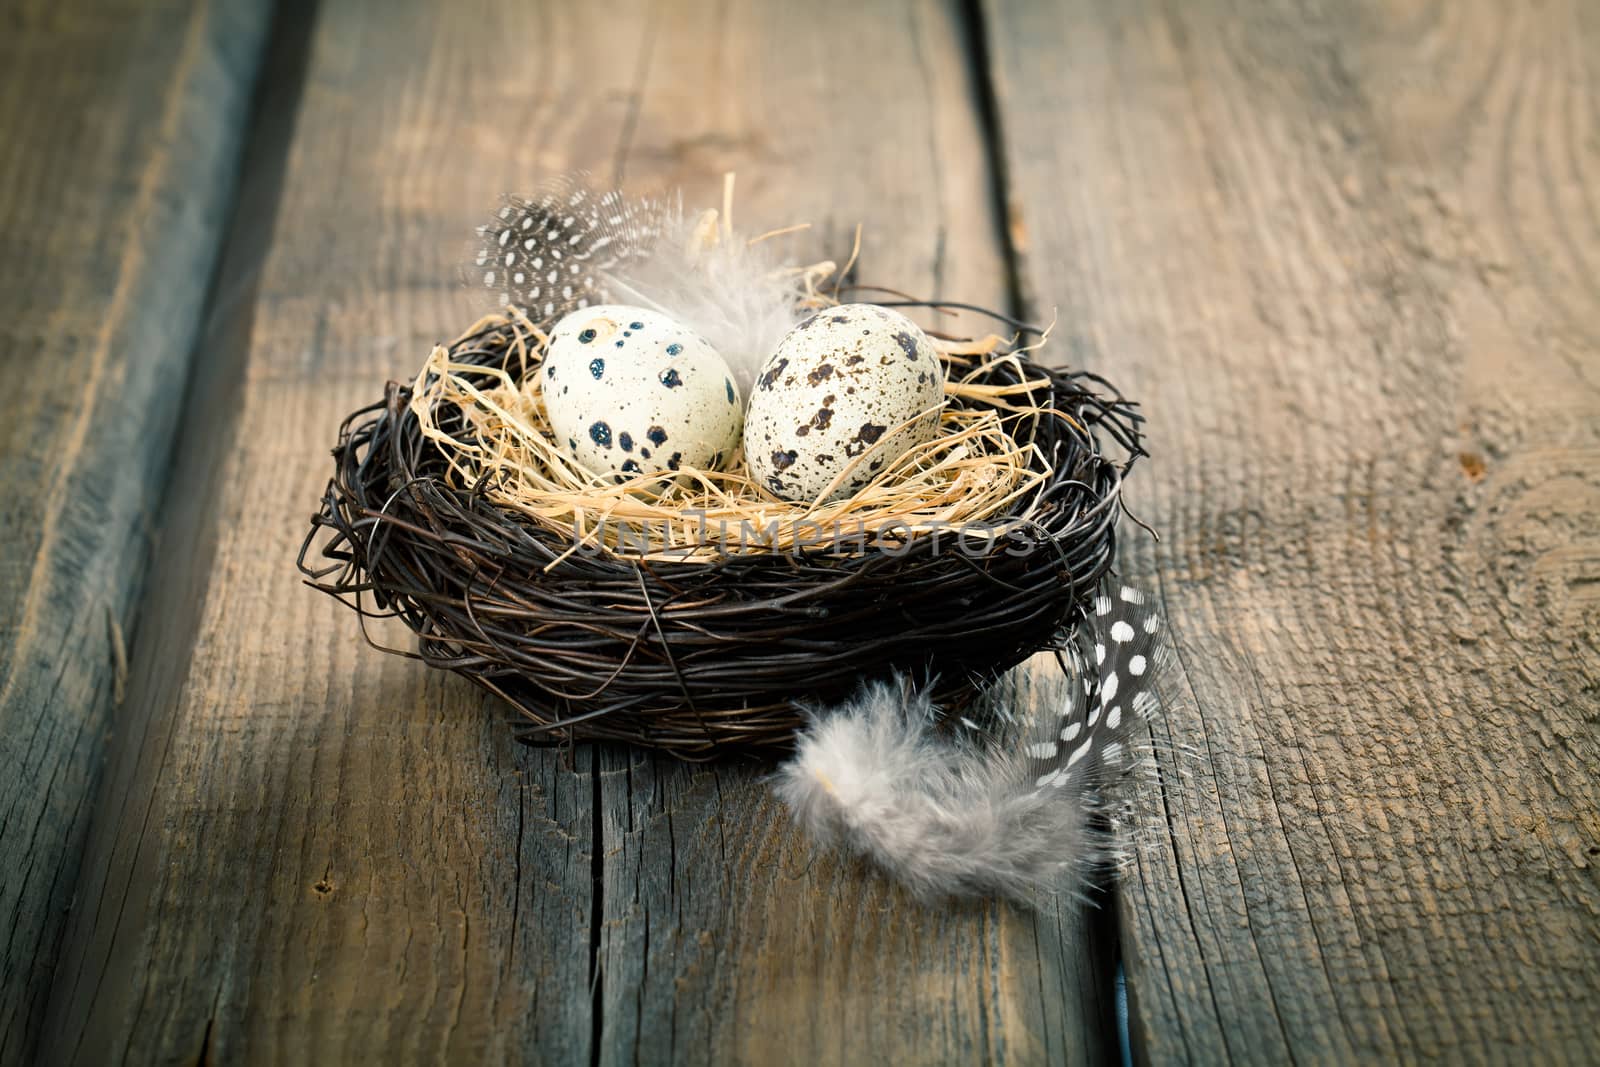 quail eggs in nest on wooden background